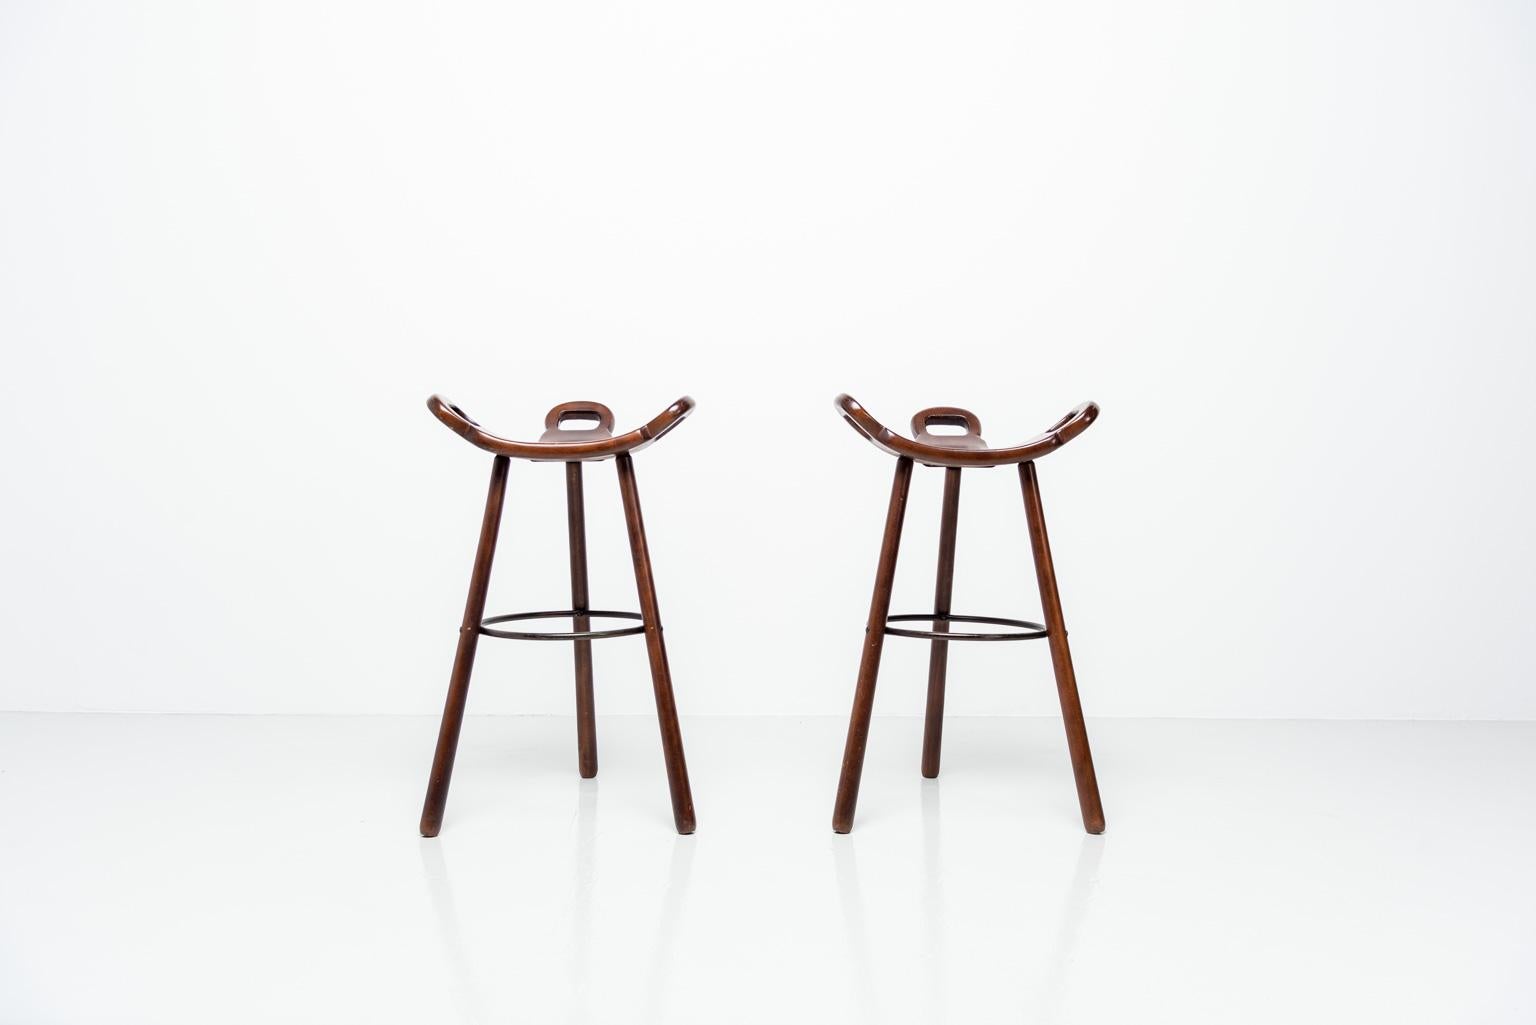 Very nice pair of bar stools designed by Carl Malmsten, Sweden 1950. These stools are very nicely shaped and made of solid birch wood, dark brown stained. The stools have a black metal supporting foot rest ring. These stools are in original